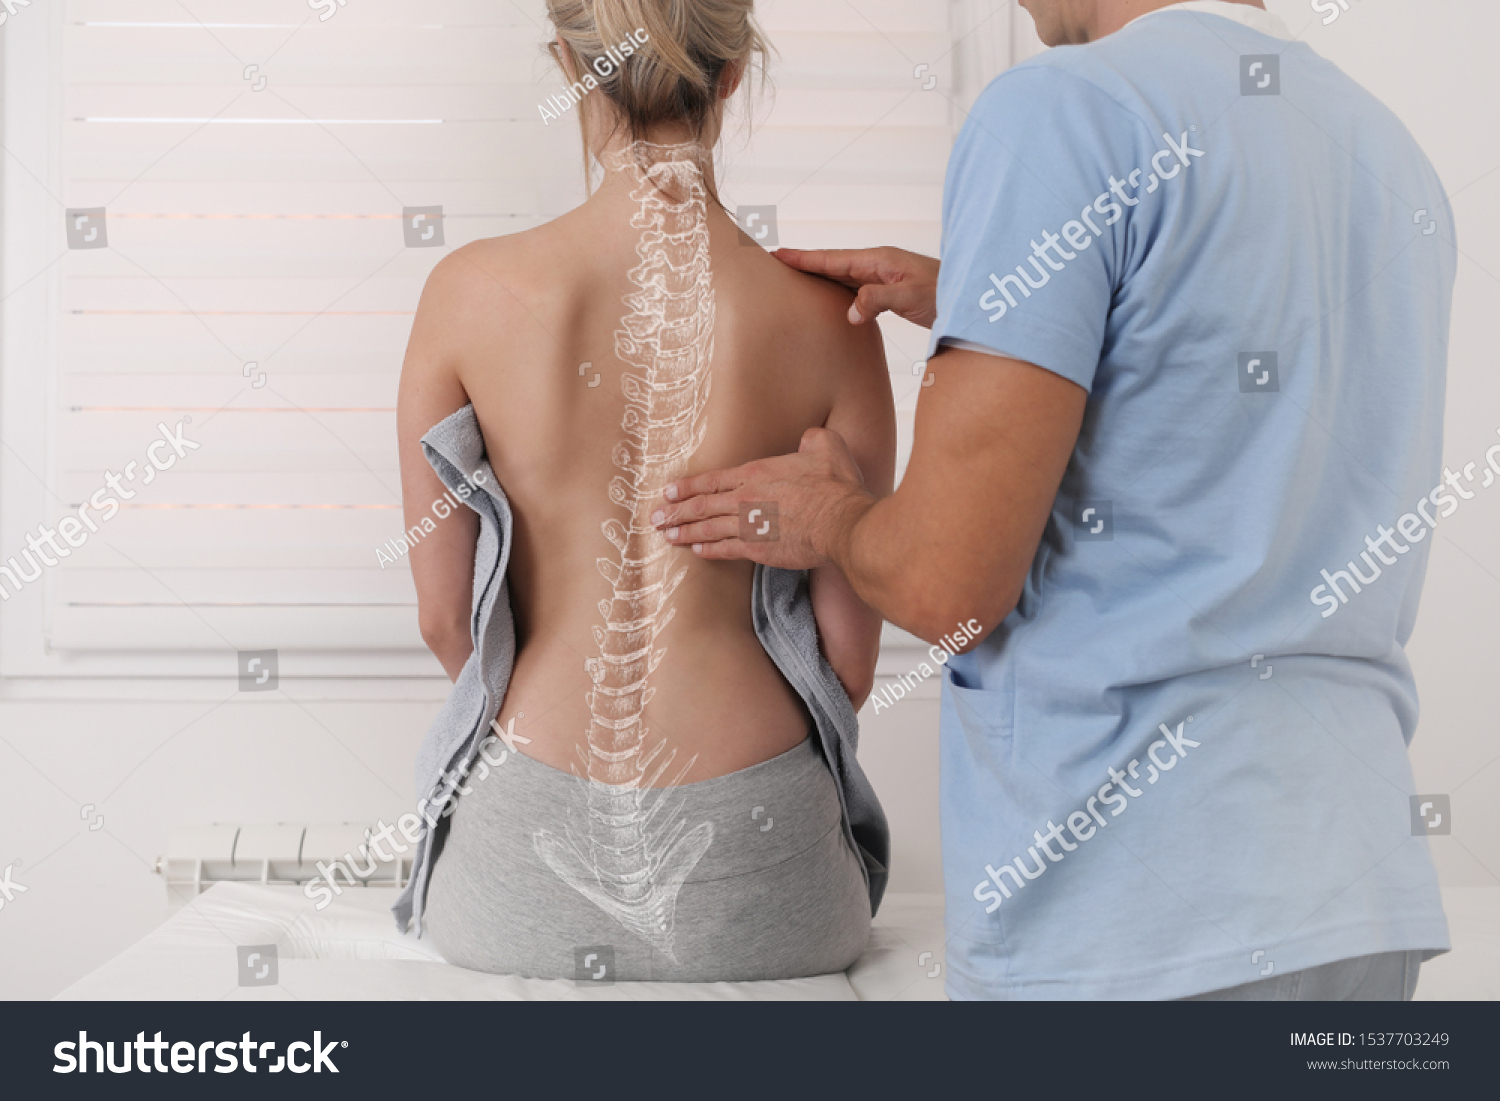 Scoliosis Spine Curve Anatomy, Posture Correction. Chiropractic treatment, Back pain relief. #1537703249